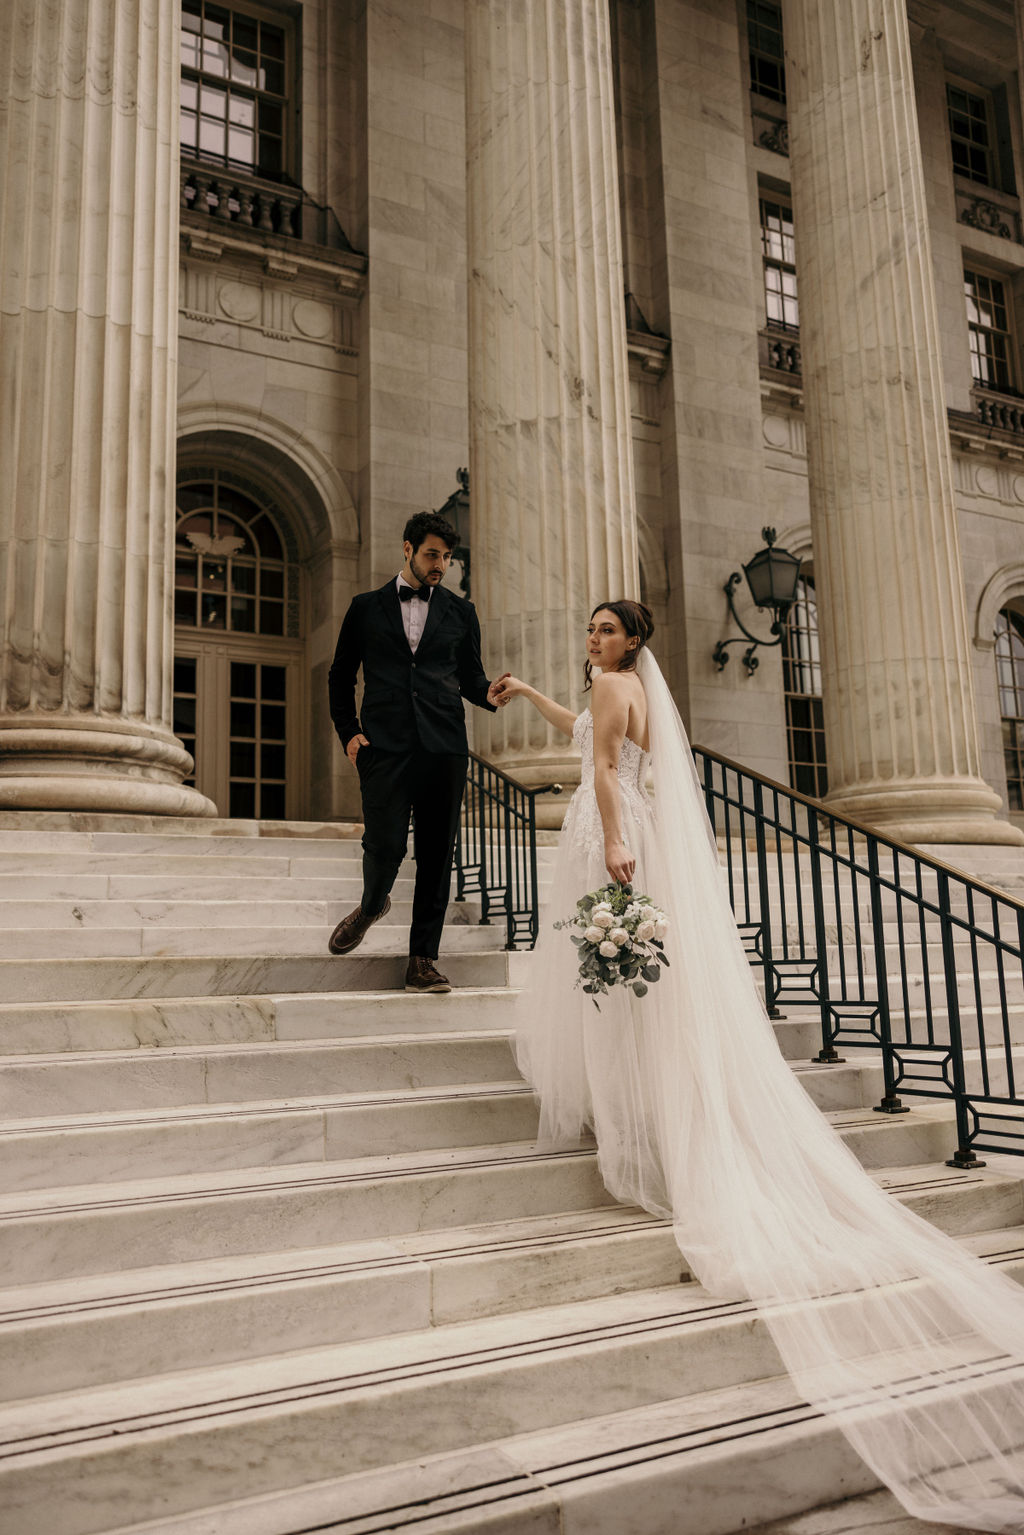 Why Renew Your Wedding Vows? Ideas, Reasons, + How-To: bride and groom walk up steps at byron white courthouse in denver